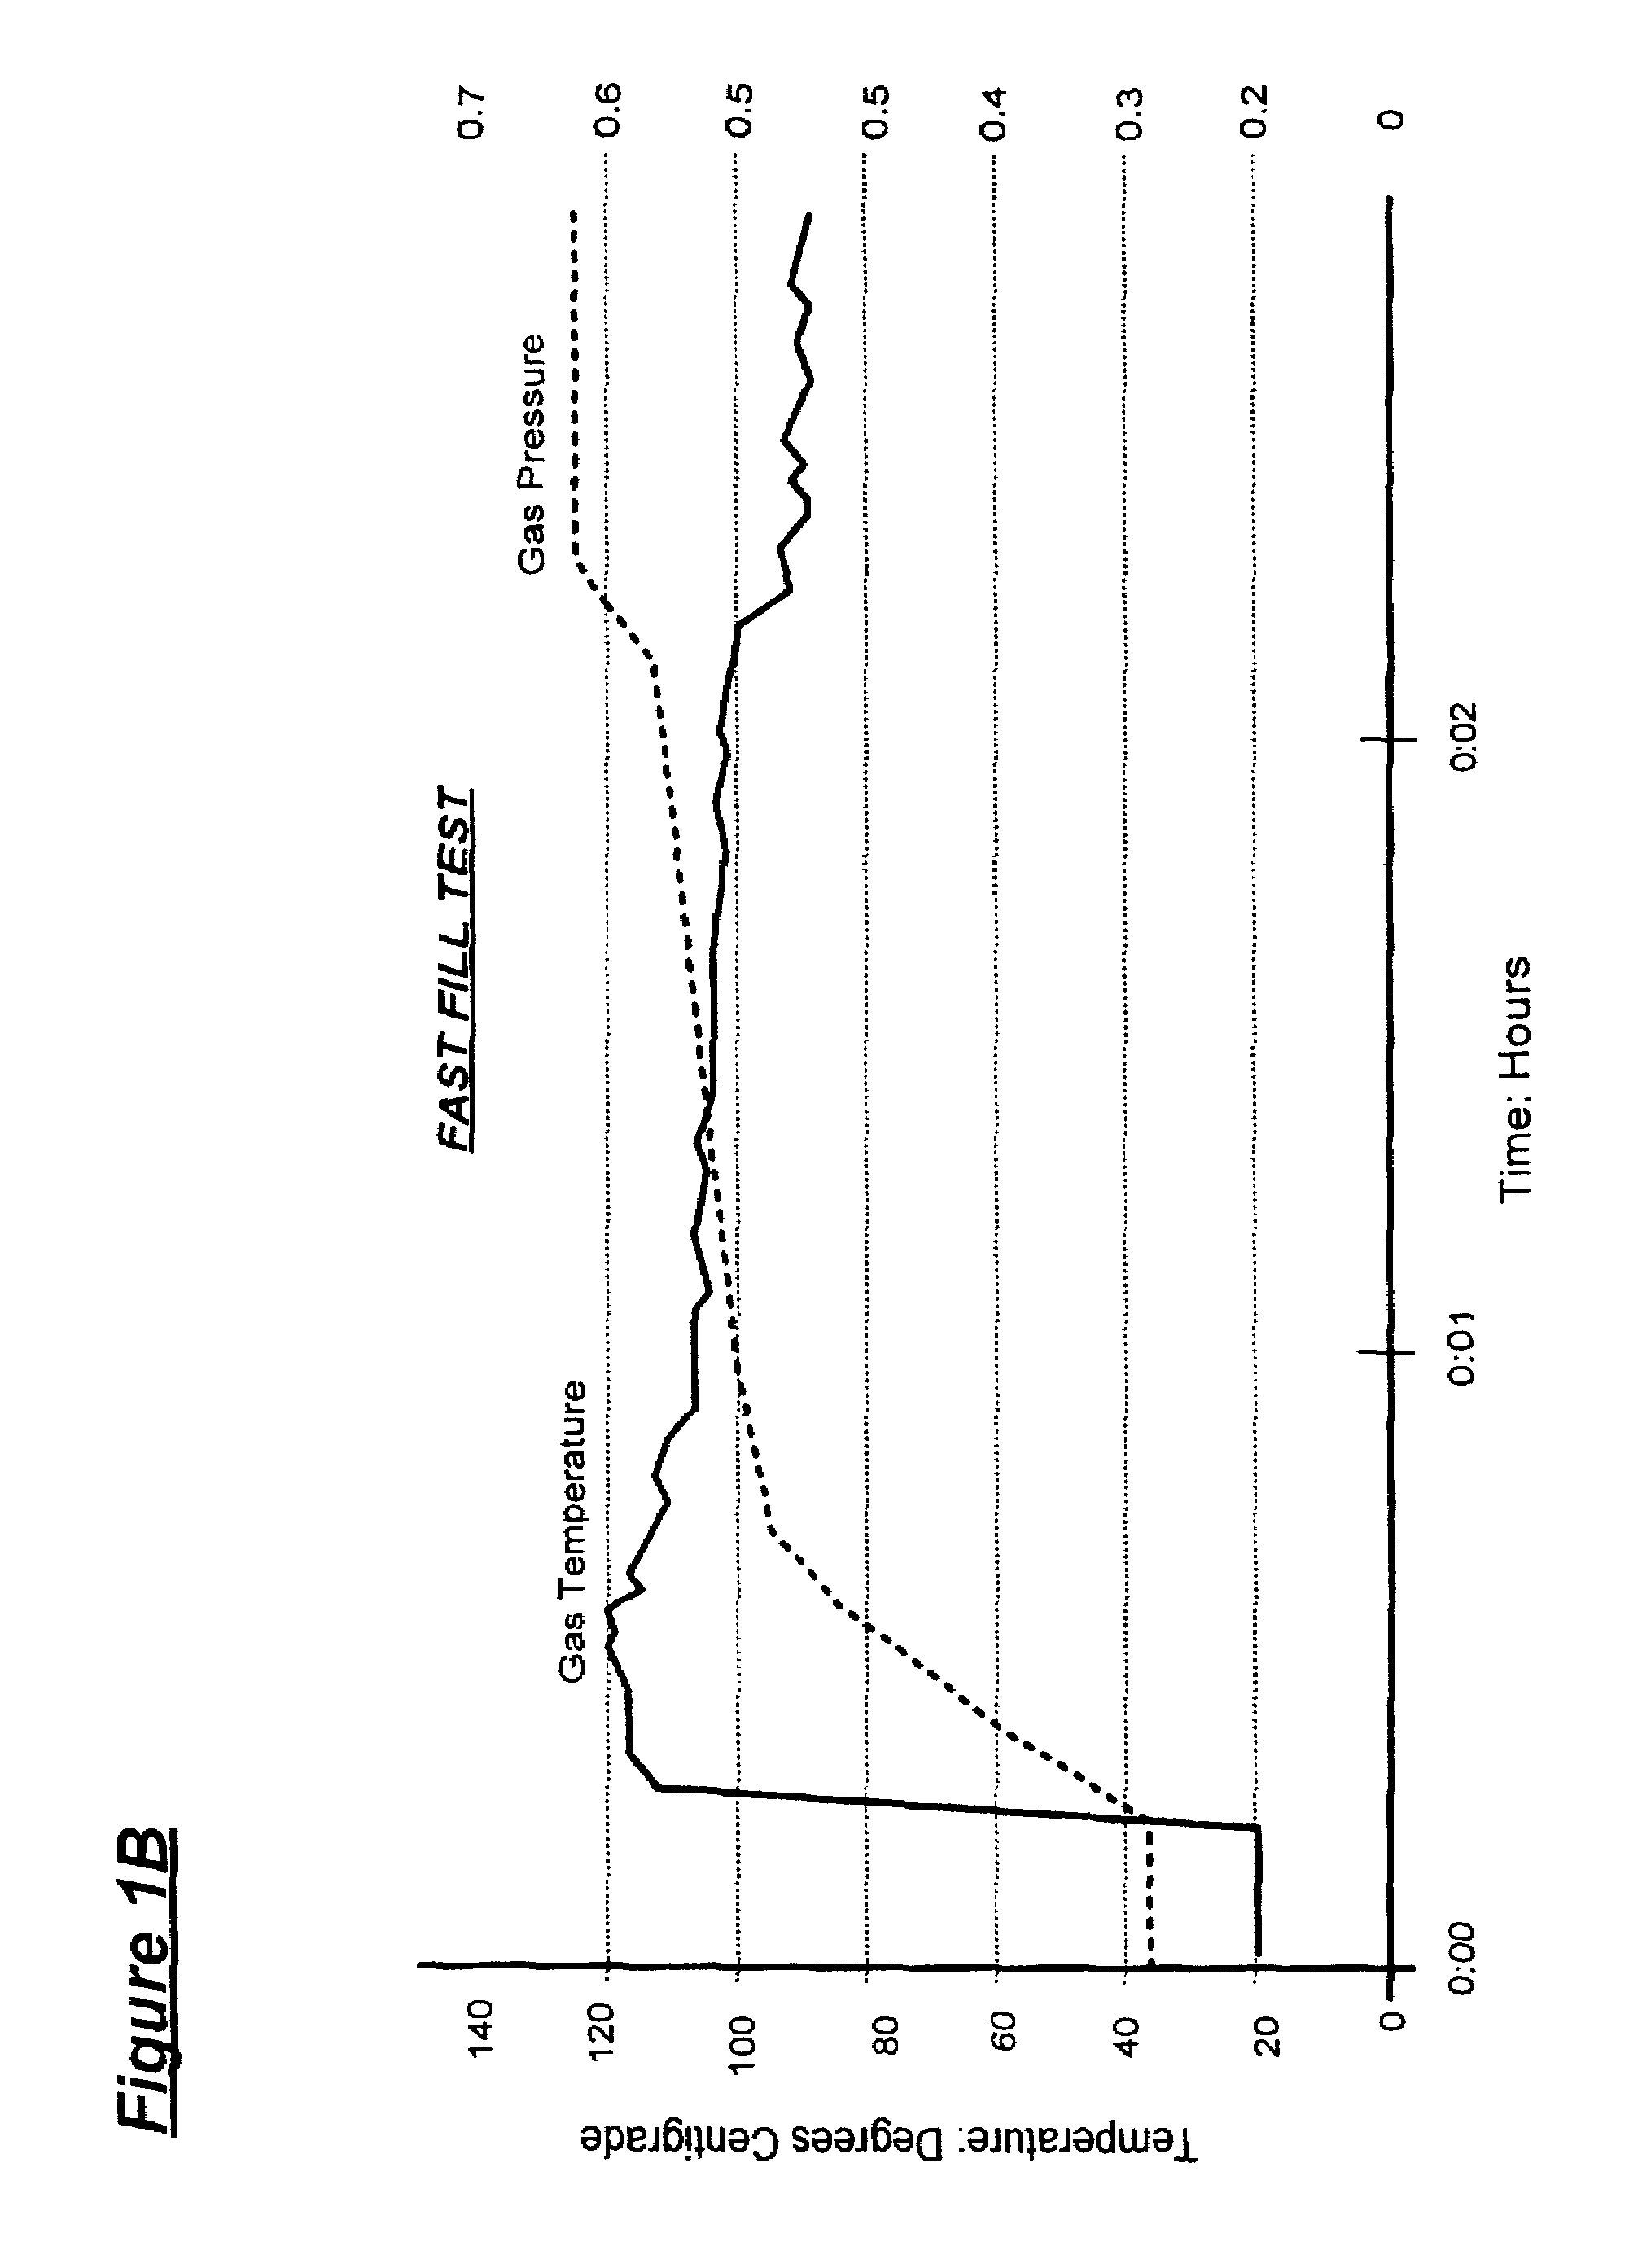 Gas cooling method using a melting/solidifying media for high pressure storage tanks for compressed natural gas or hydrogen